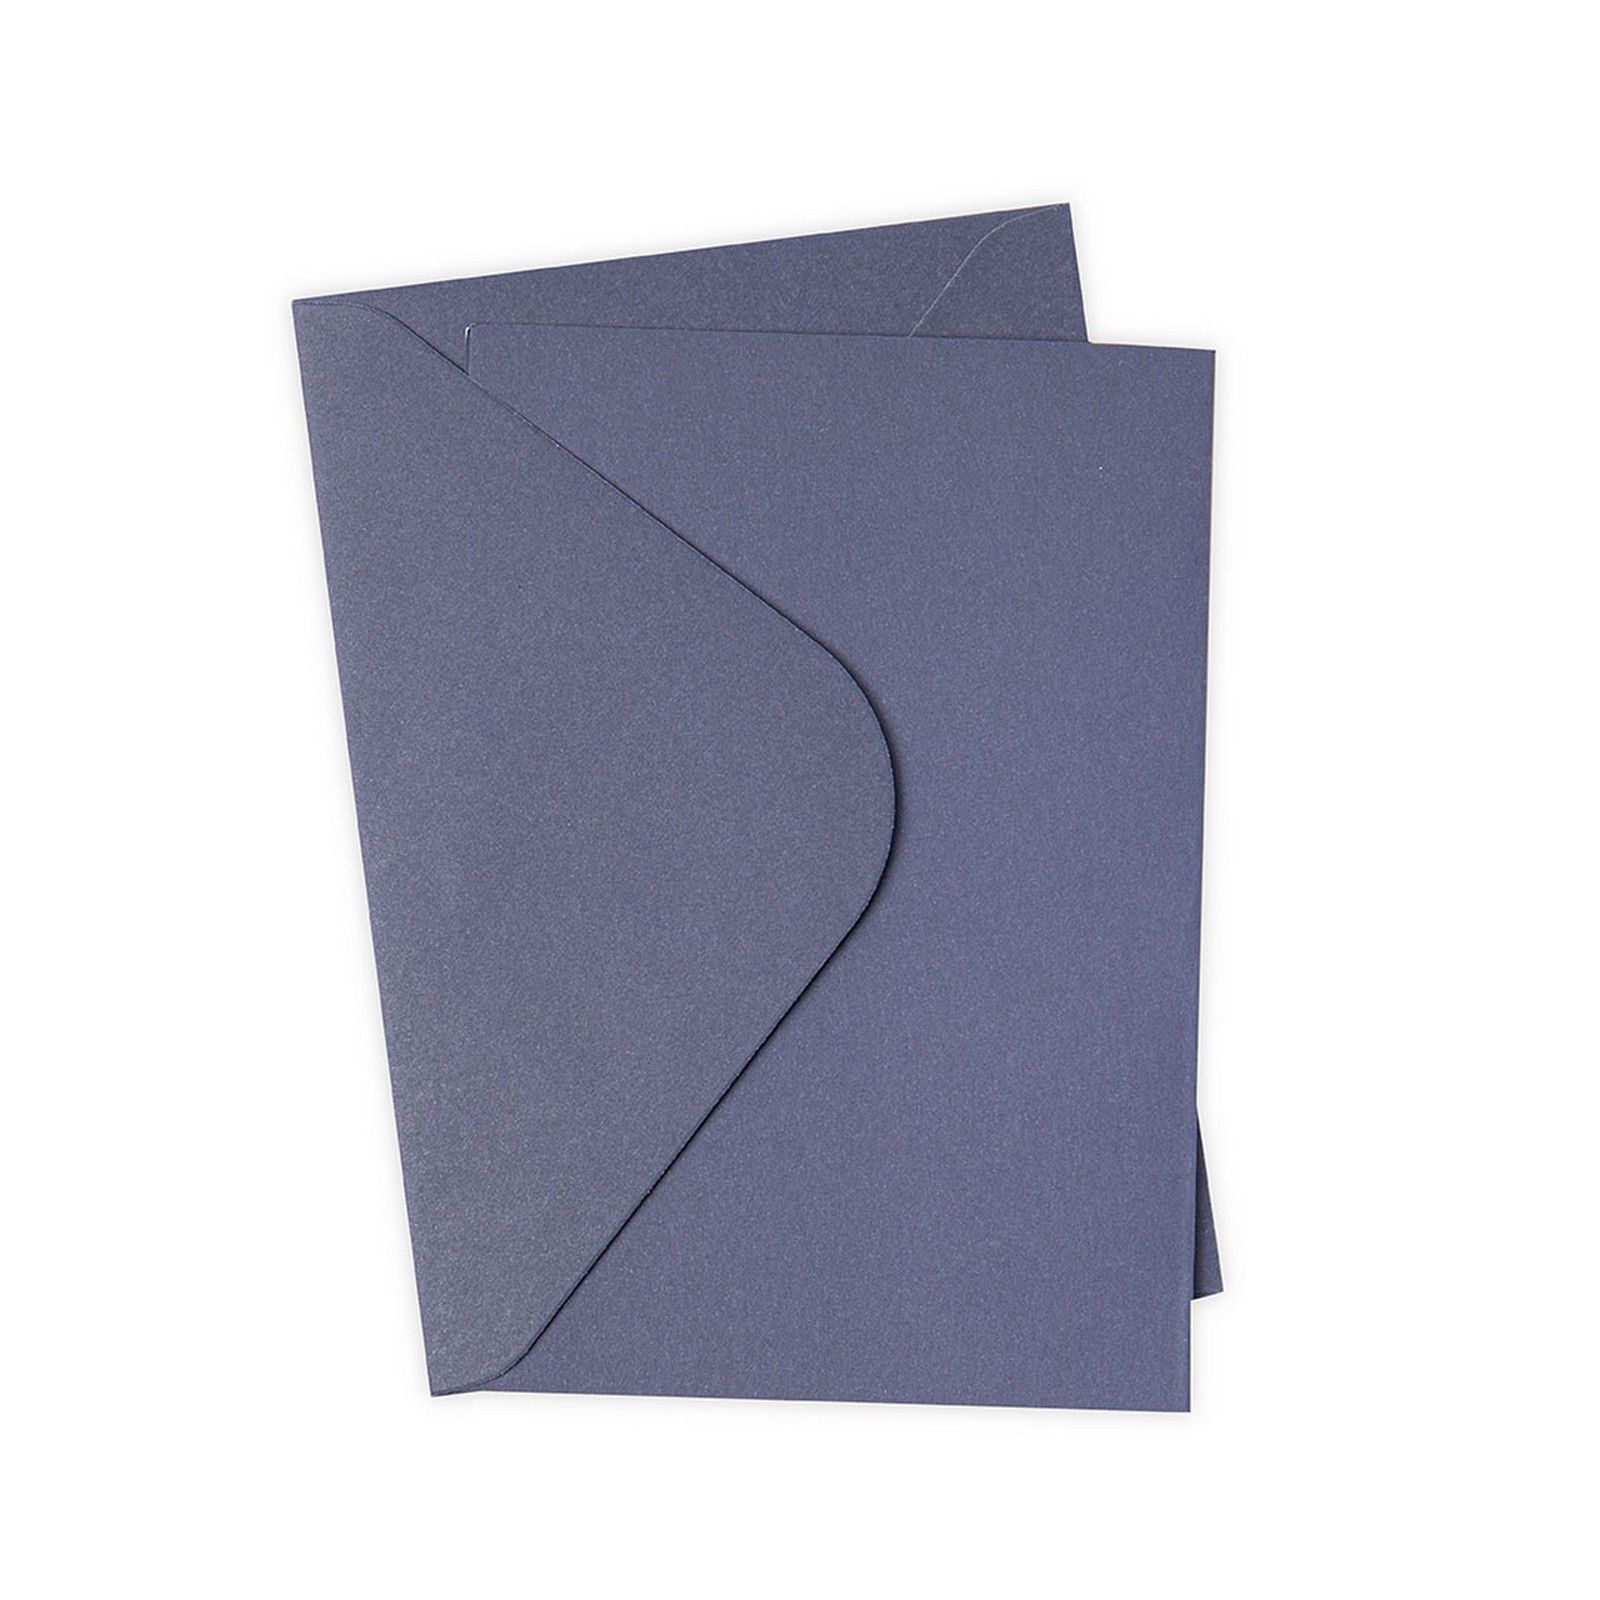 Sizzix • Surfacez Card & Envelope Pack A6 French Navy 10PK